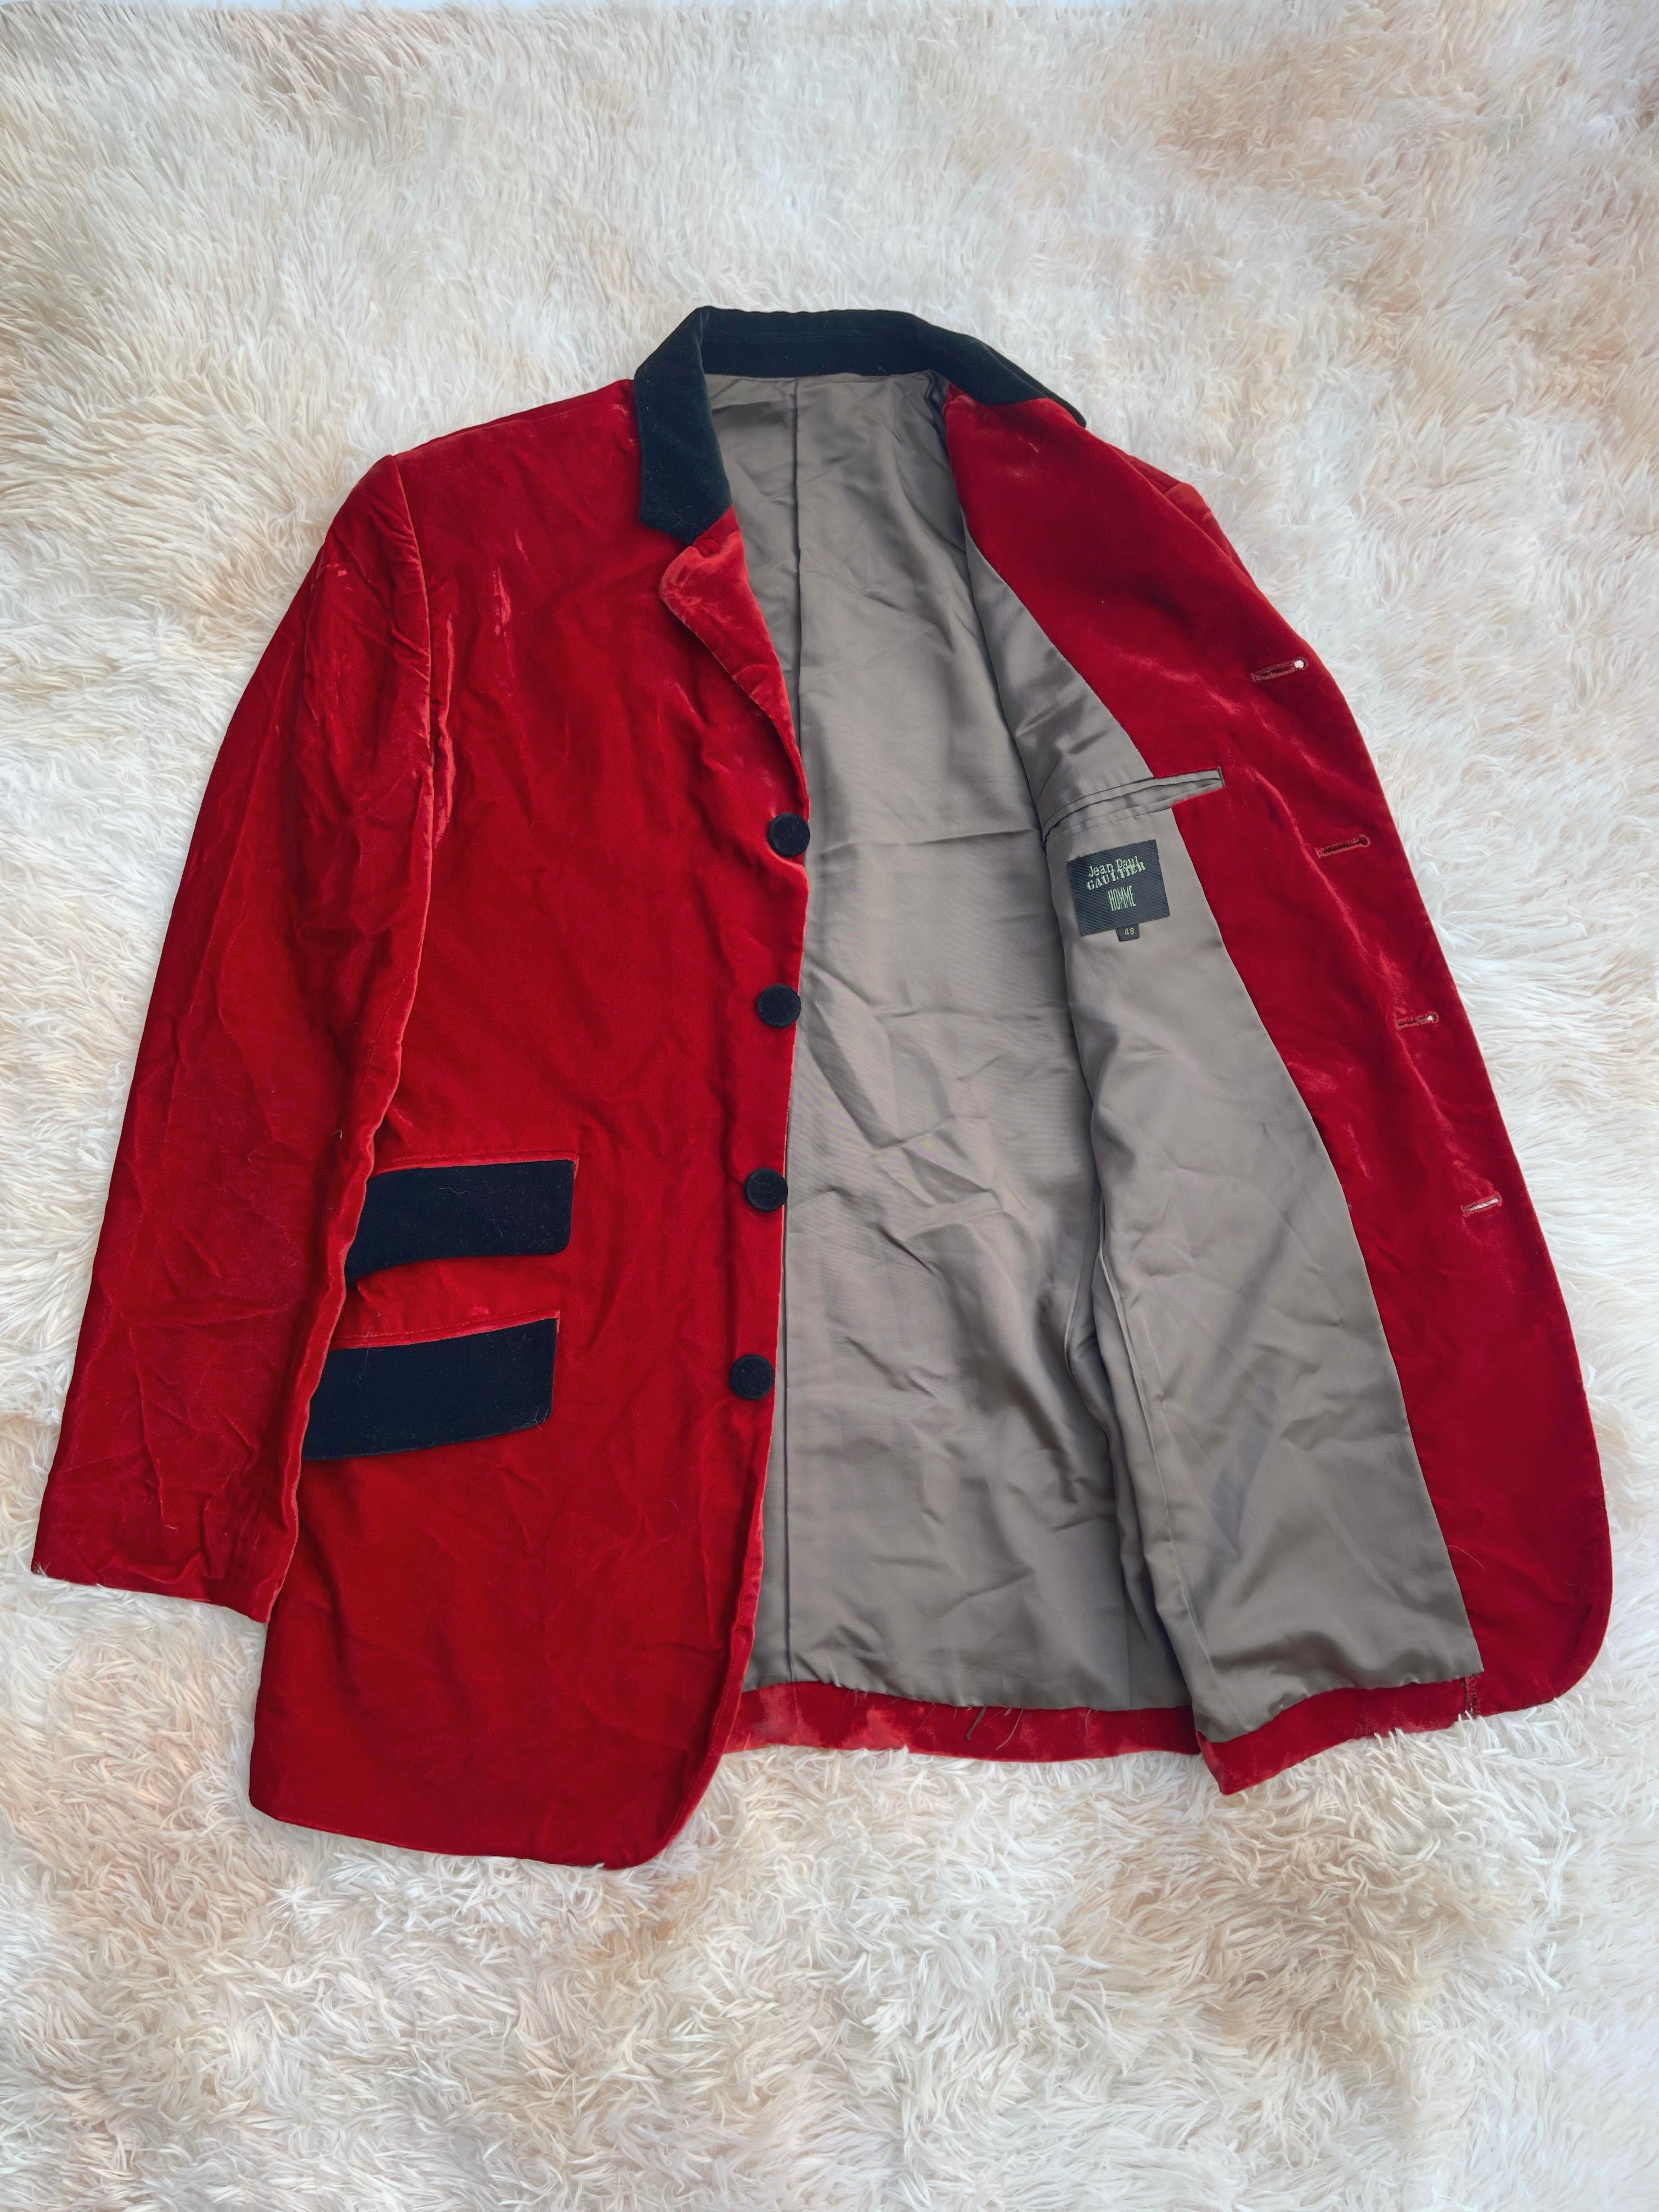 Vintage Gaultier Piece from the 1990's, relaxed fit. Perfect for casual wear or event.

Size on tag: 48, fits true to size

Condition: 8,5/10. No significant flaws, several wrinkles on due to storage 

Feels free to message me with any questions